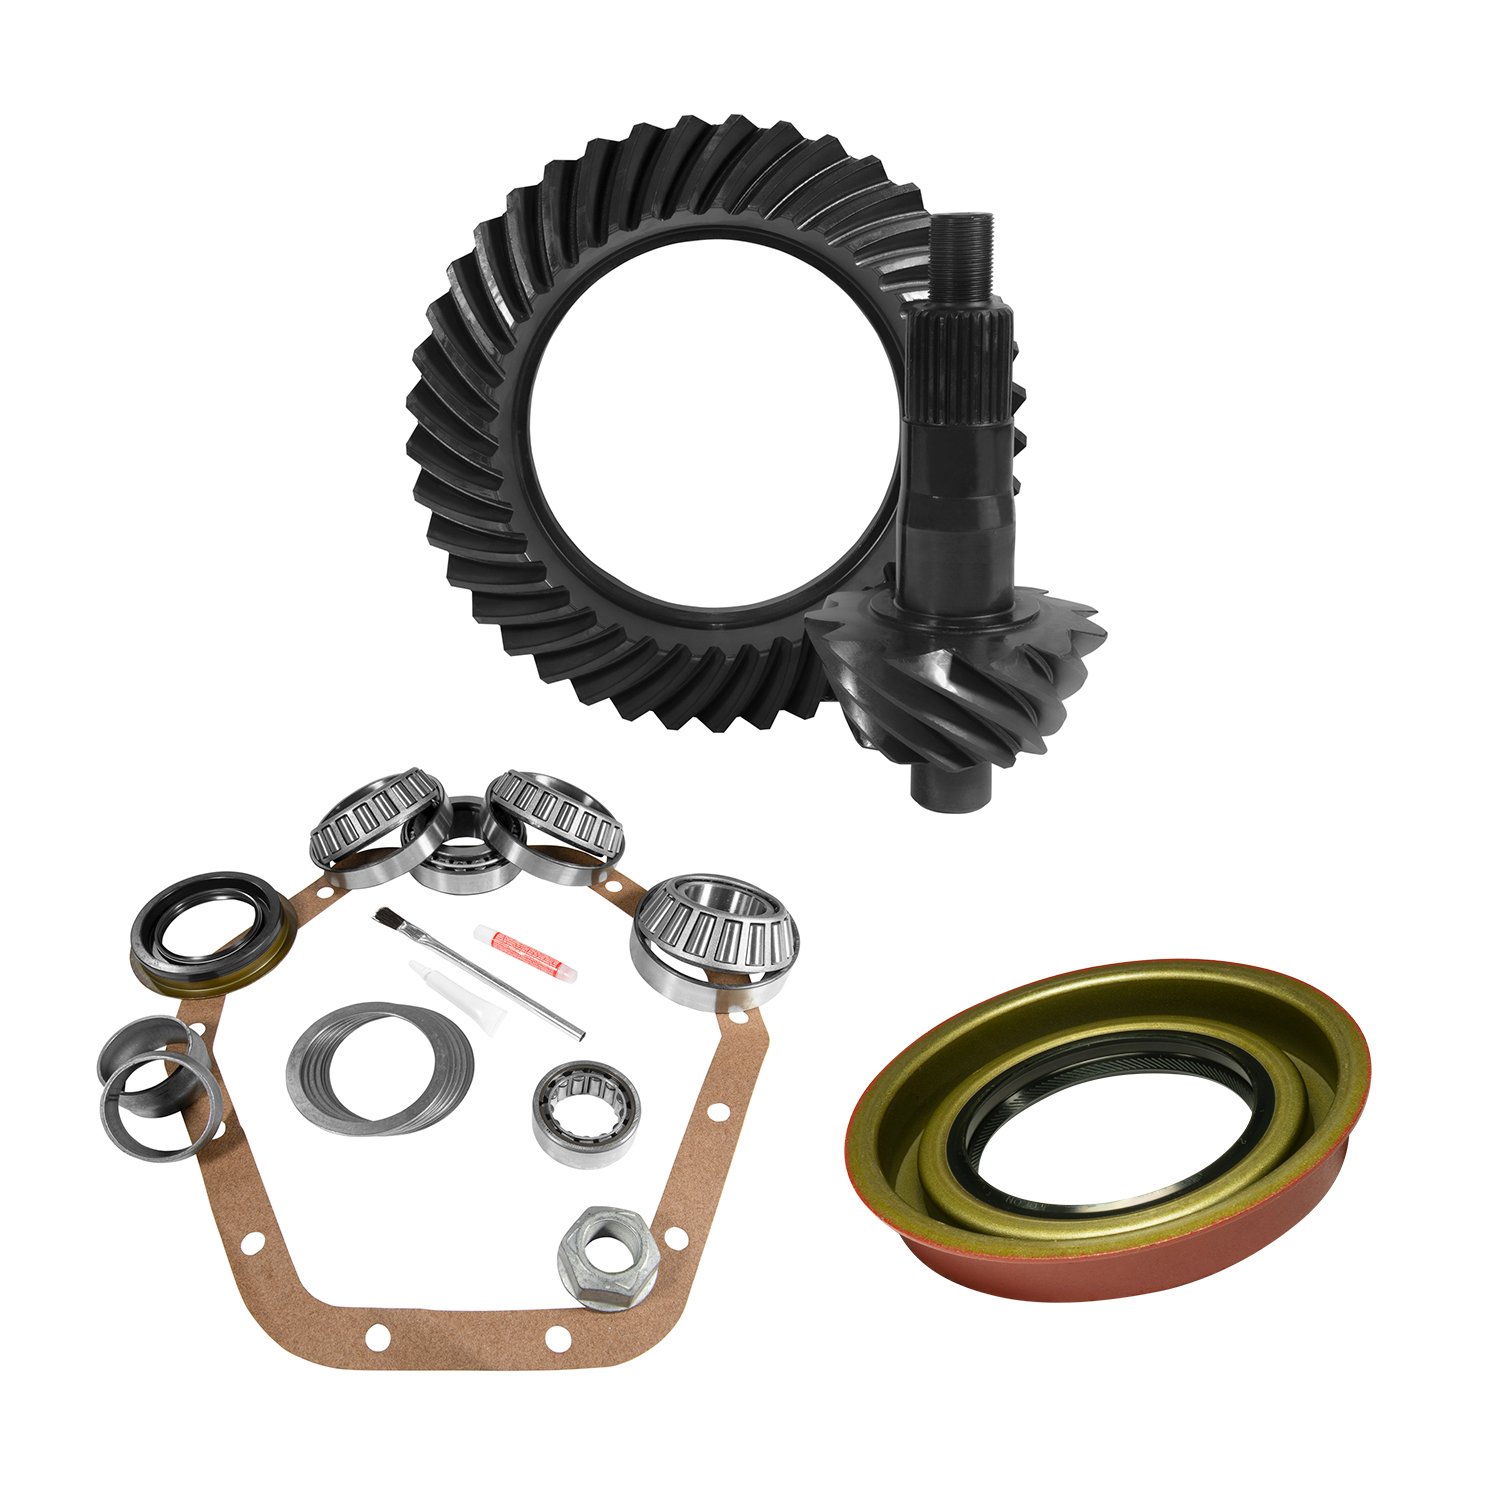 USA Standard 10837 Ring & Pinion And Install Kit, 10.5 in. GM 14 Bolt, 5.38 Thick Rear